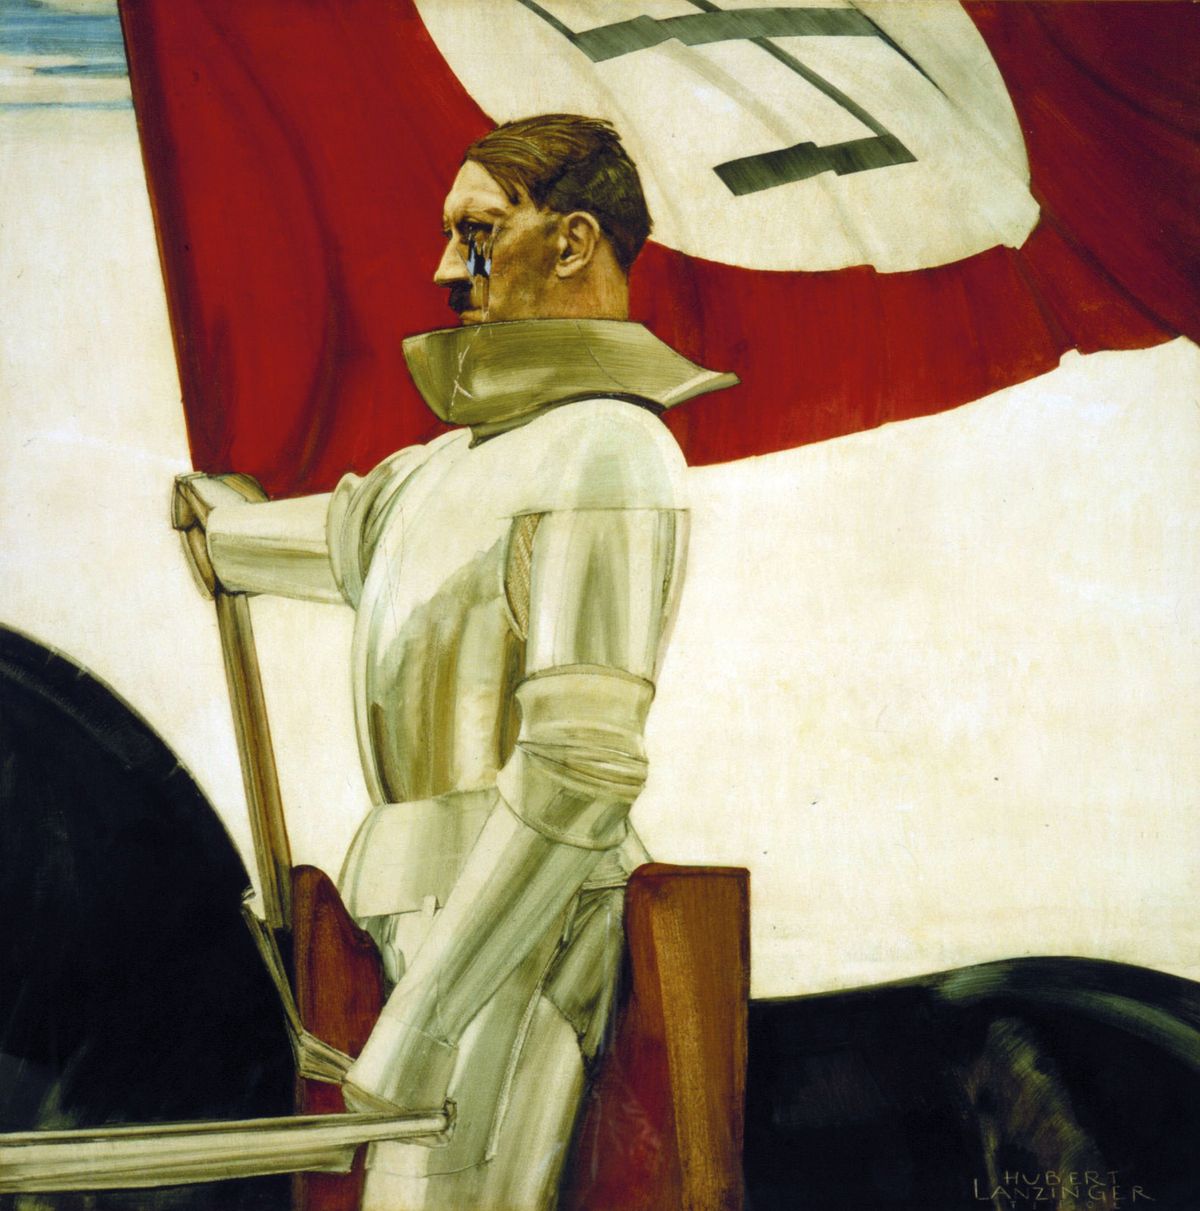 Weaponised culture: Herbert Lanzinger, The Standard Bearer (1934) Courtesy of the US Army Center of Military History, Washington, DC